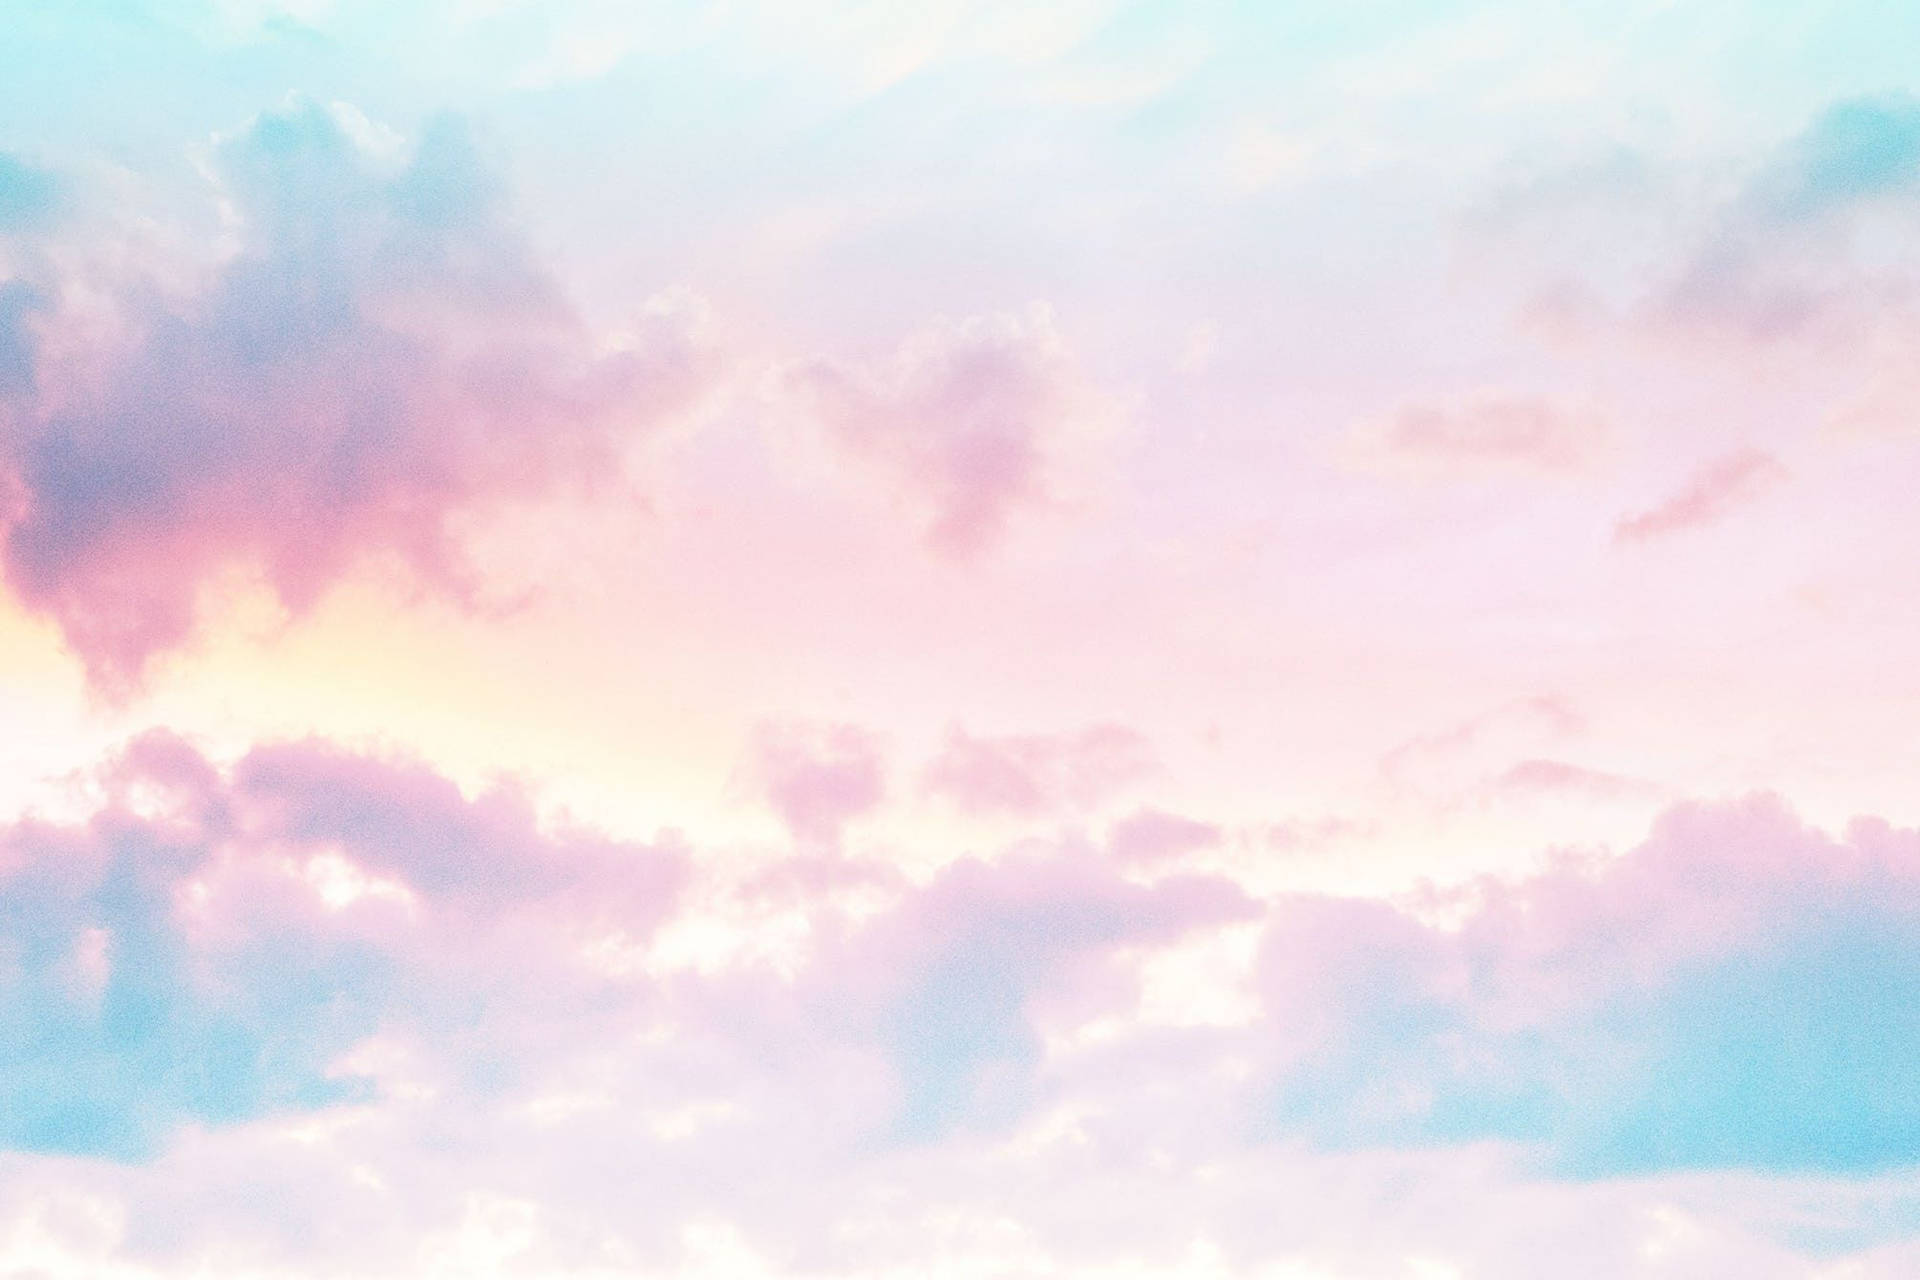 A pink and blue sky with clouds - Pretty